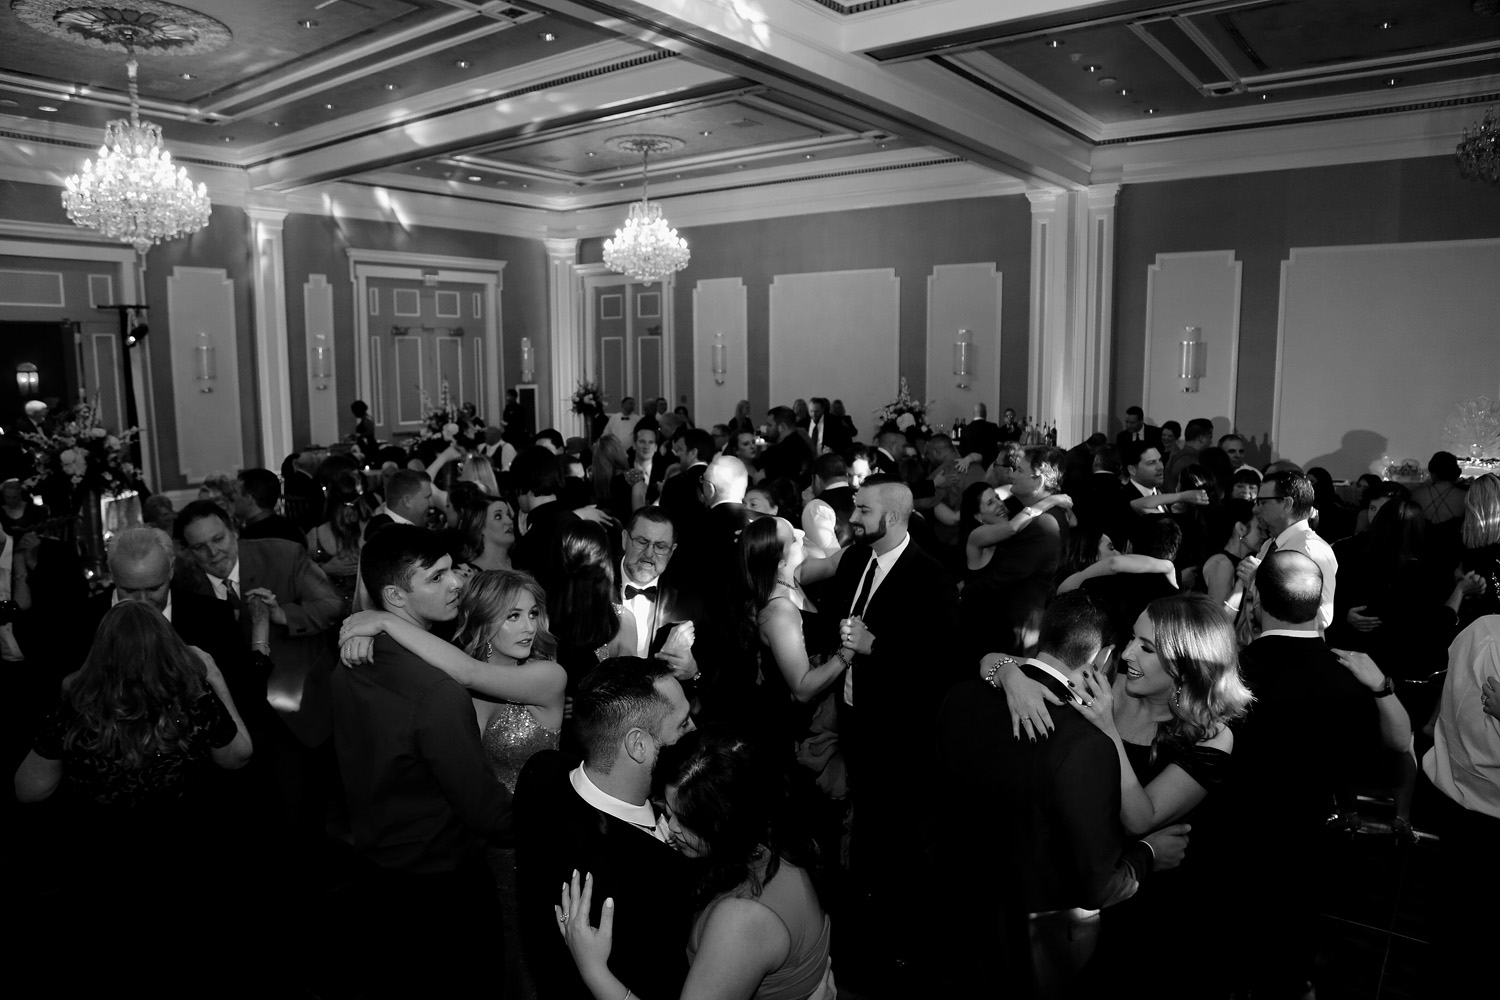 Guests packed the Royal Sonesta's ballroom dance floor and partied til the stroke of midnight!